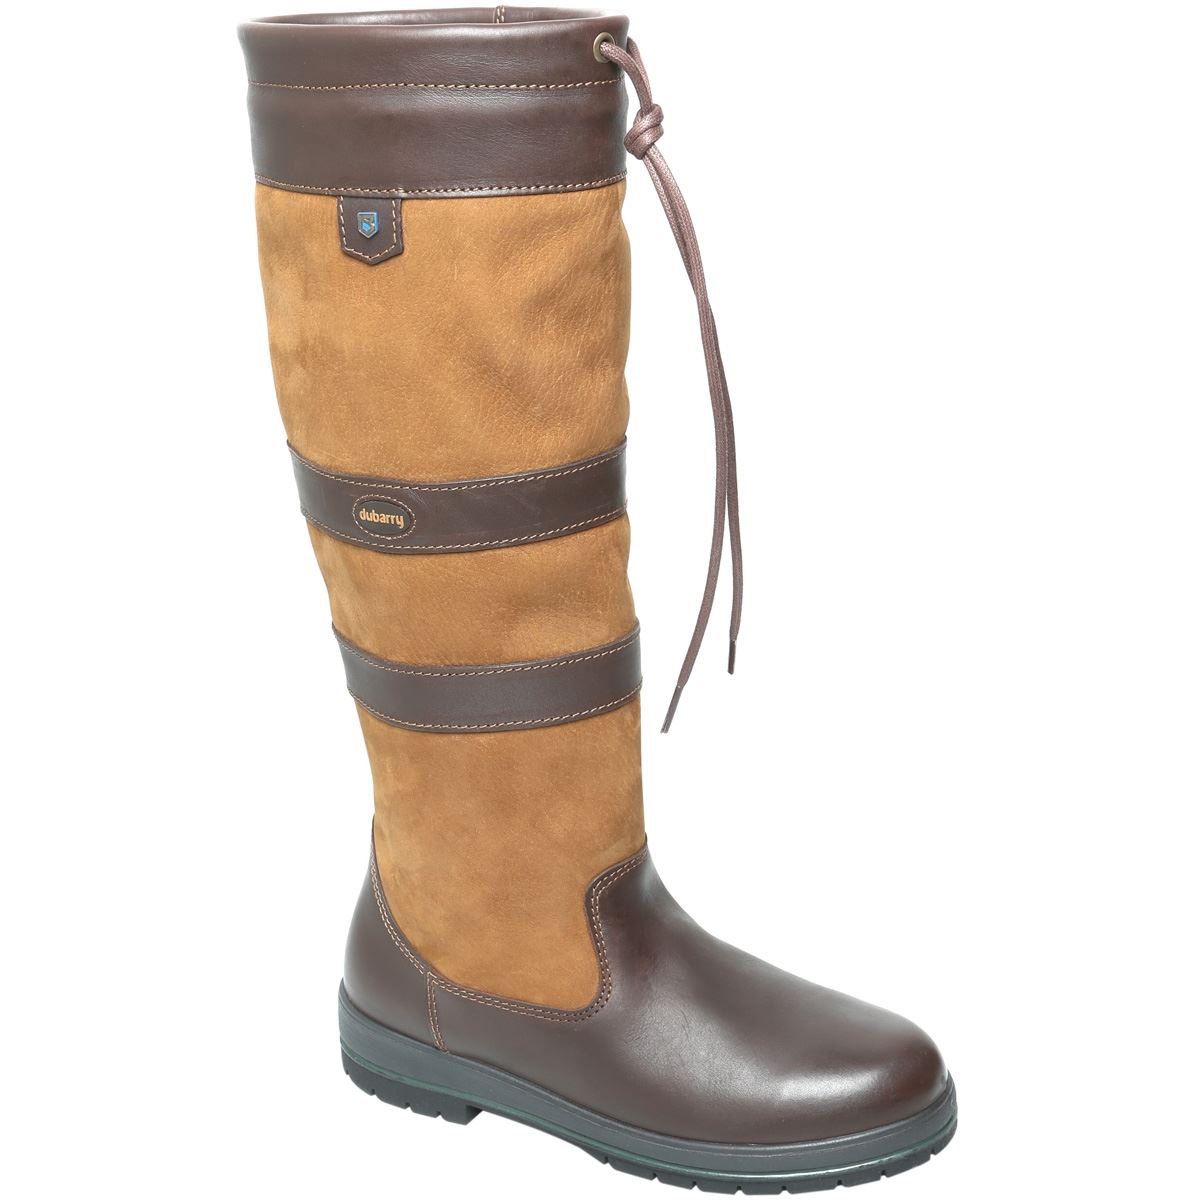 Dubarry Galway Boots Questions & Answers